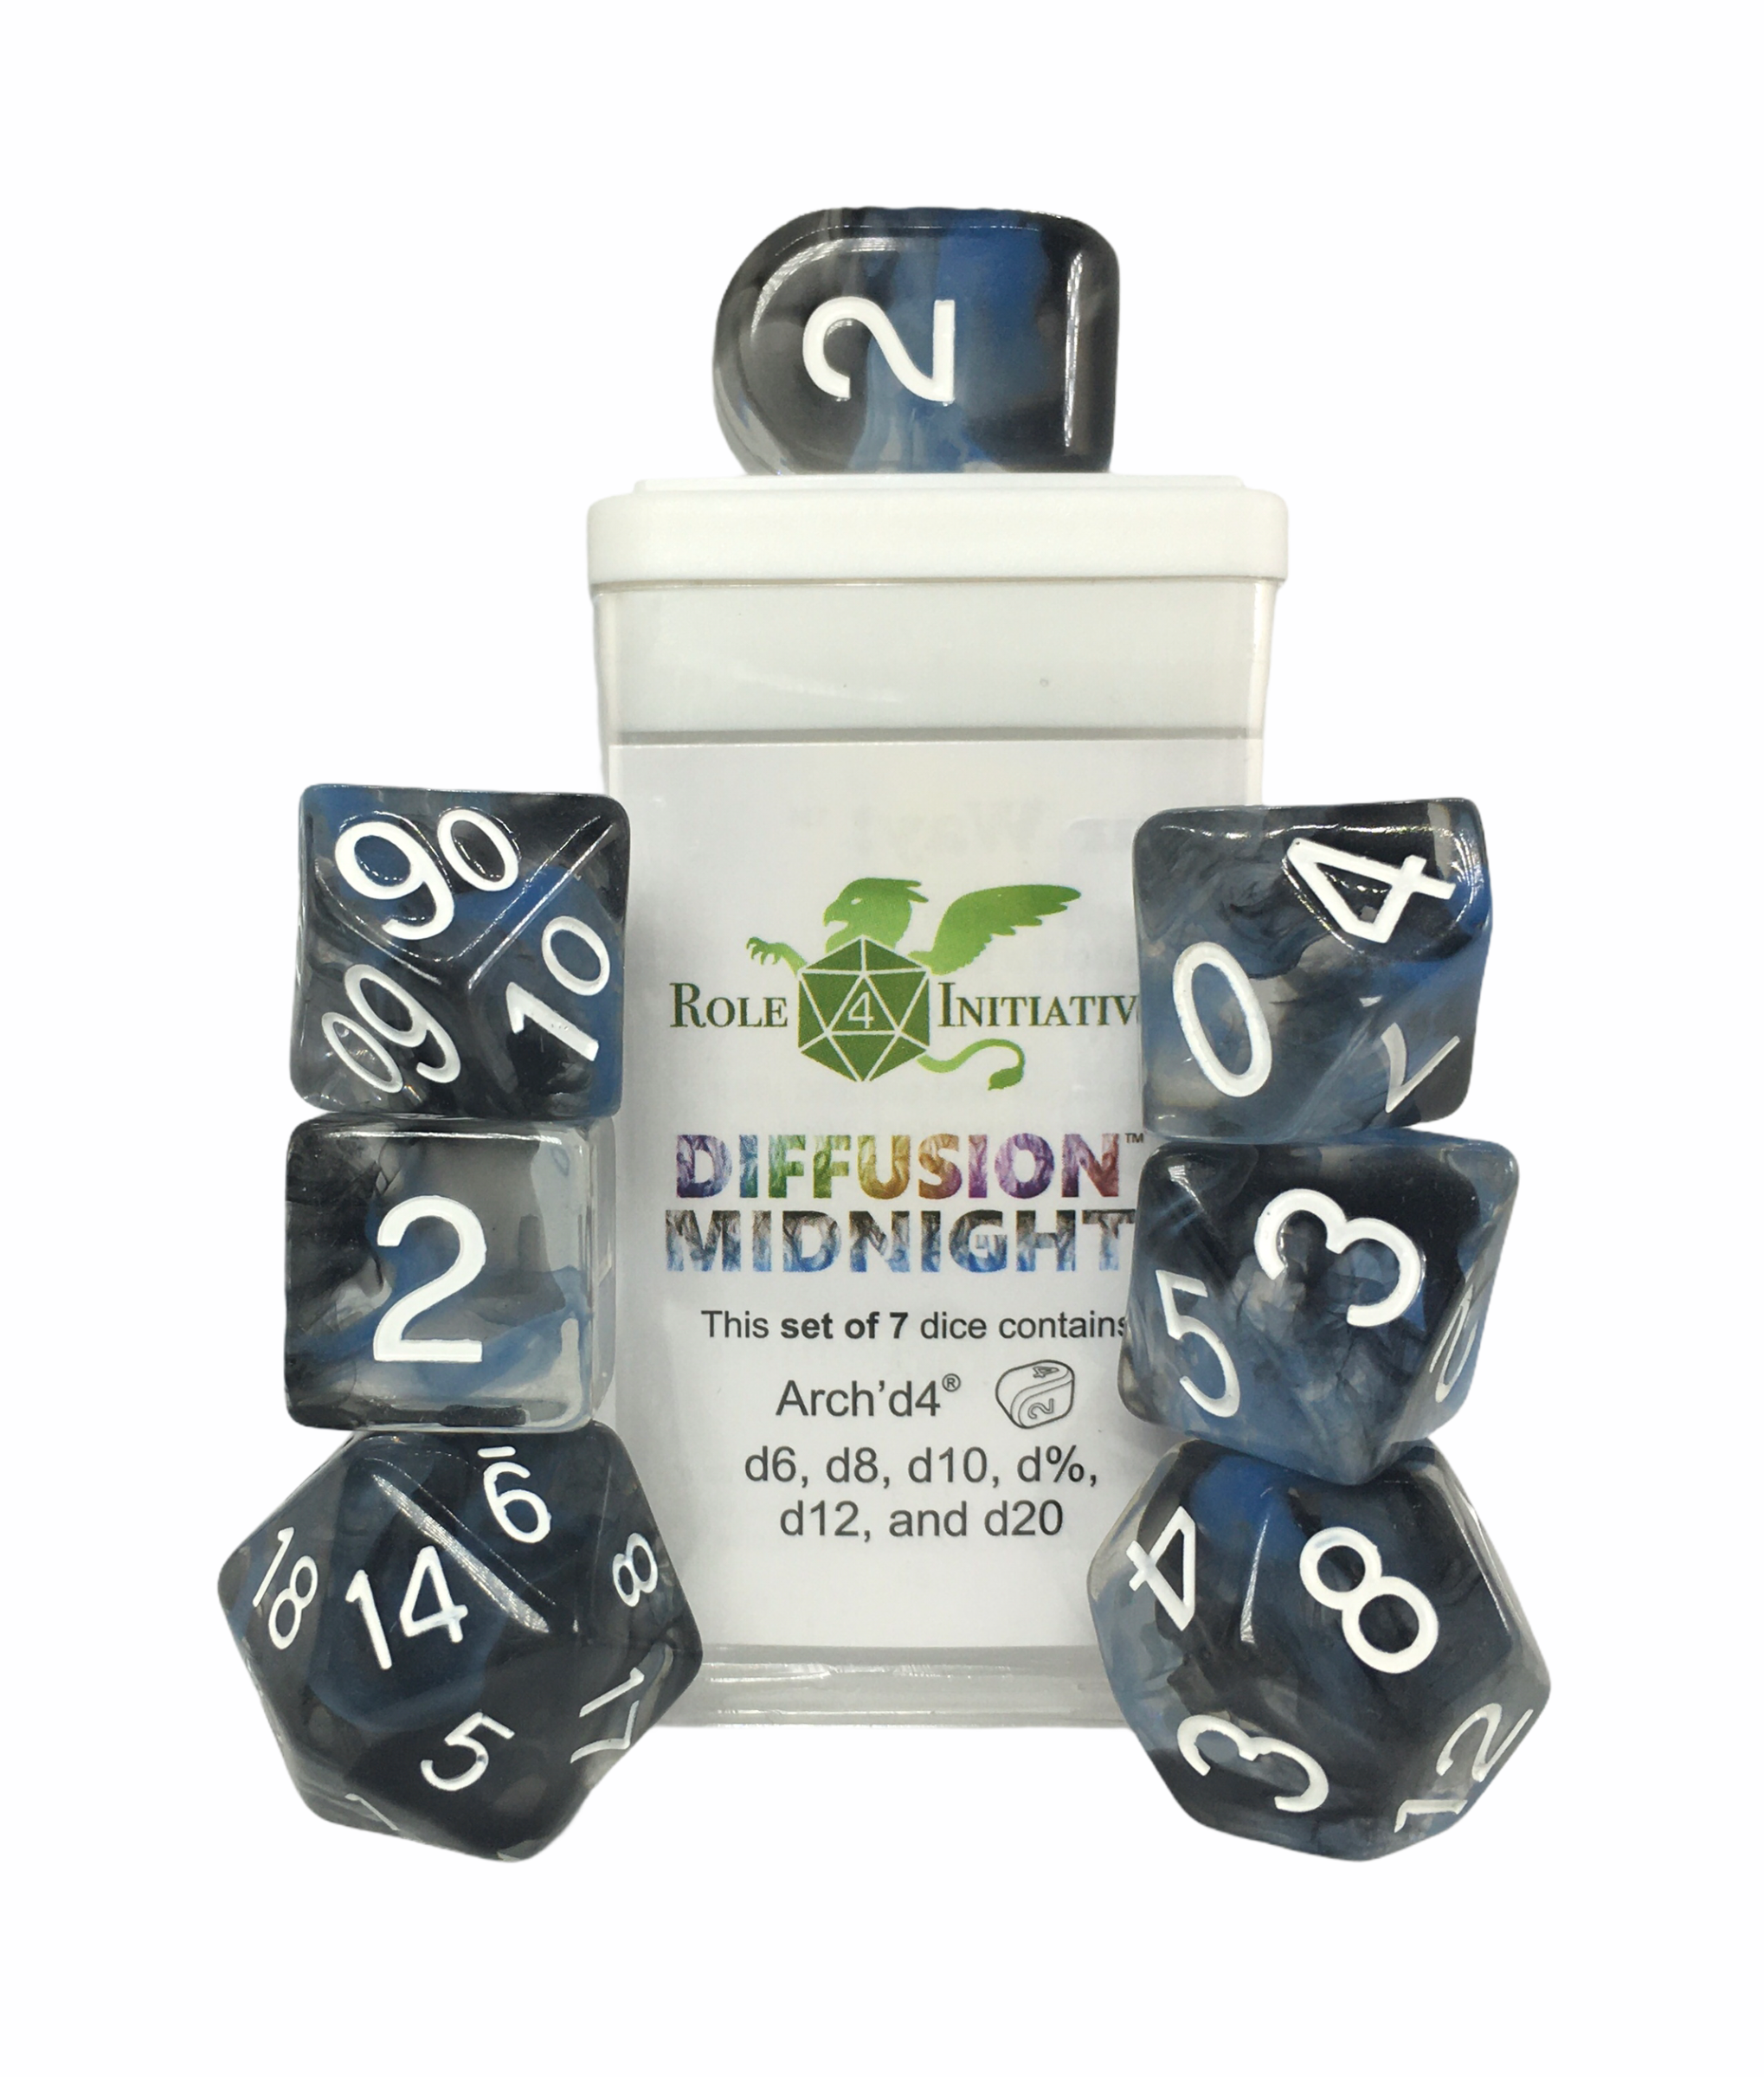 Role 4 Initiative: Polyhedral 7 Dice Set: Diffusion Midnight Arch D4 